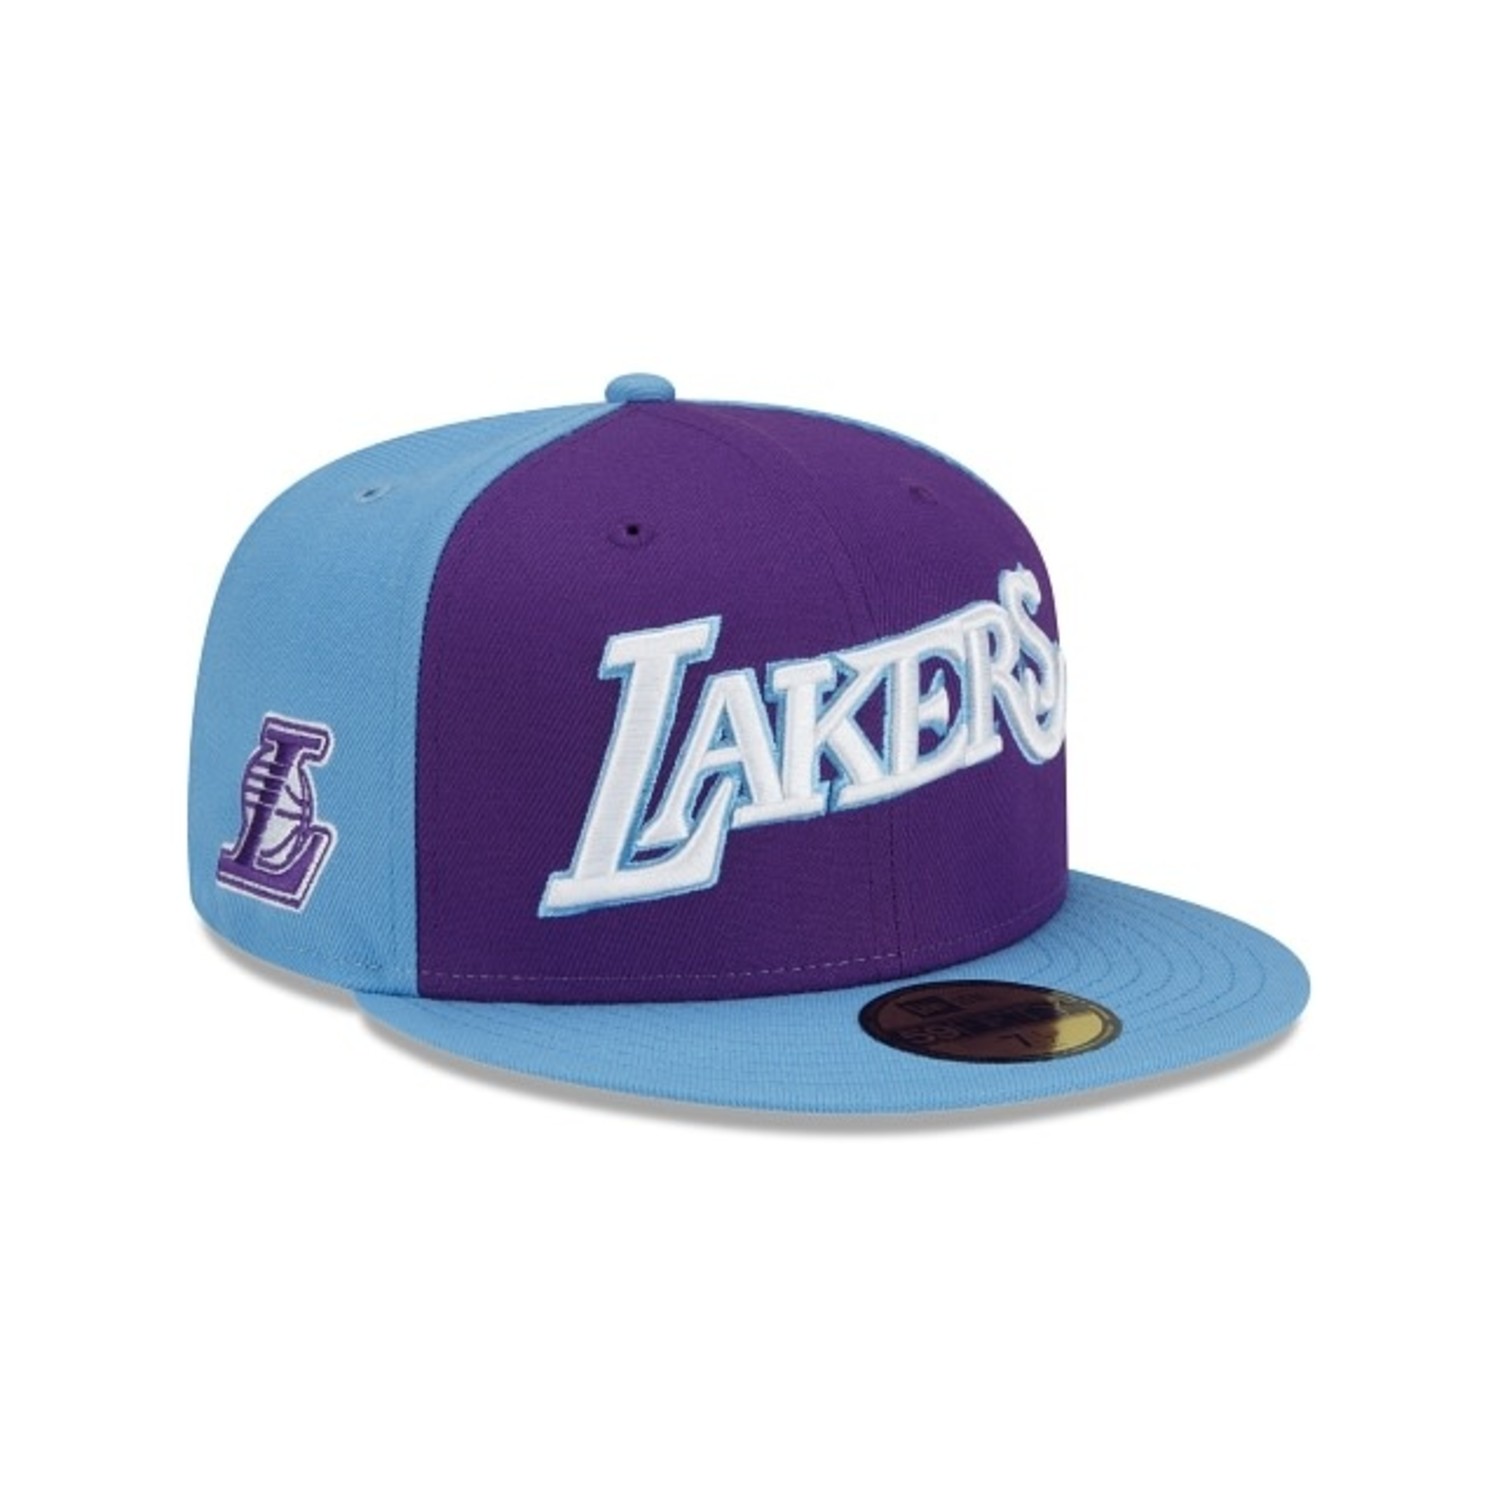 Lakers City Edition Official Purple/Light Blue - The Locker Room